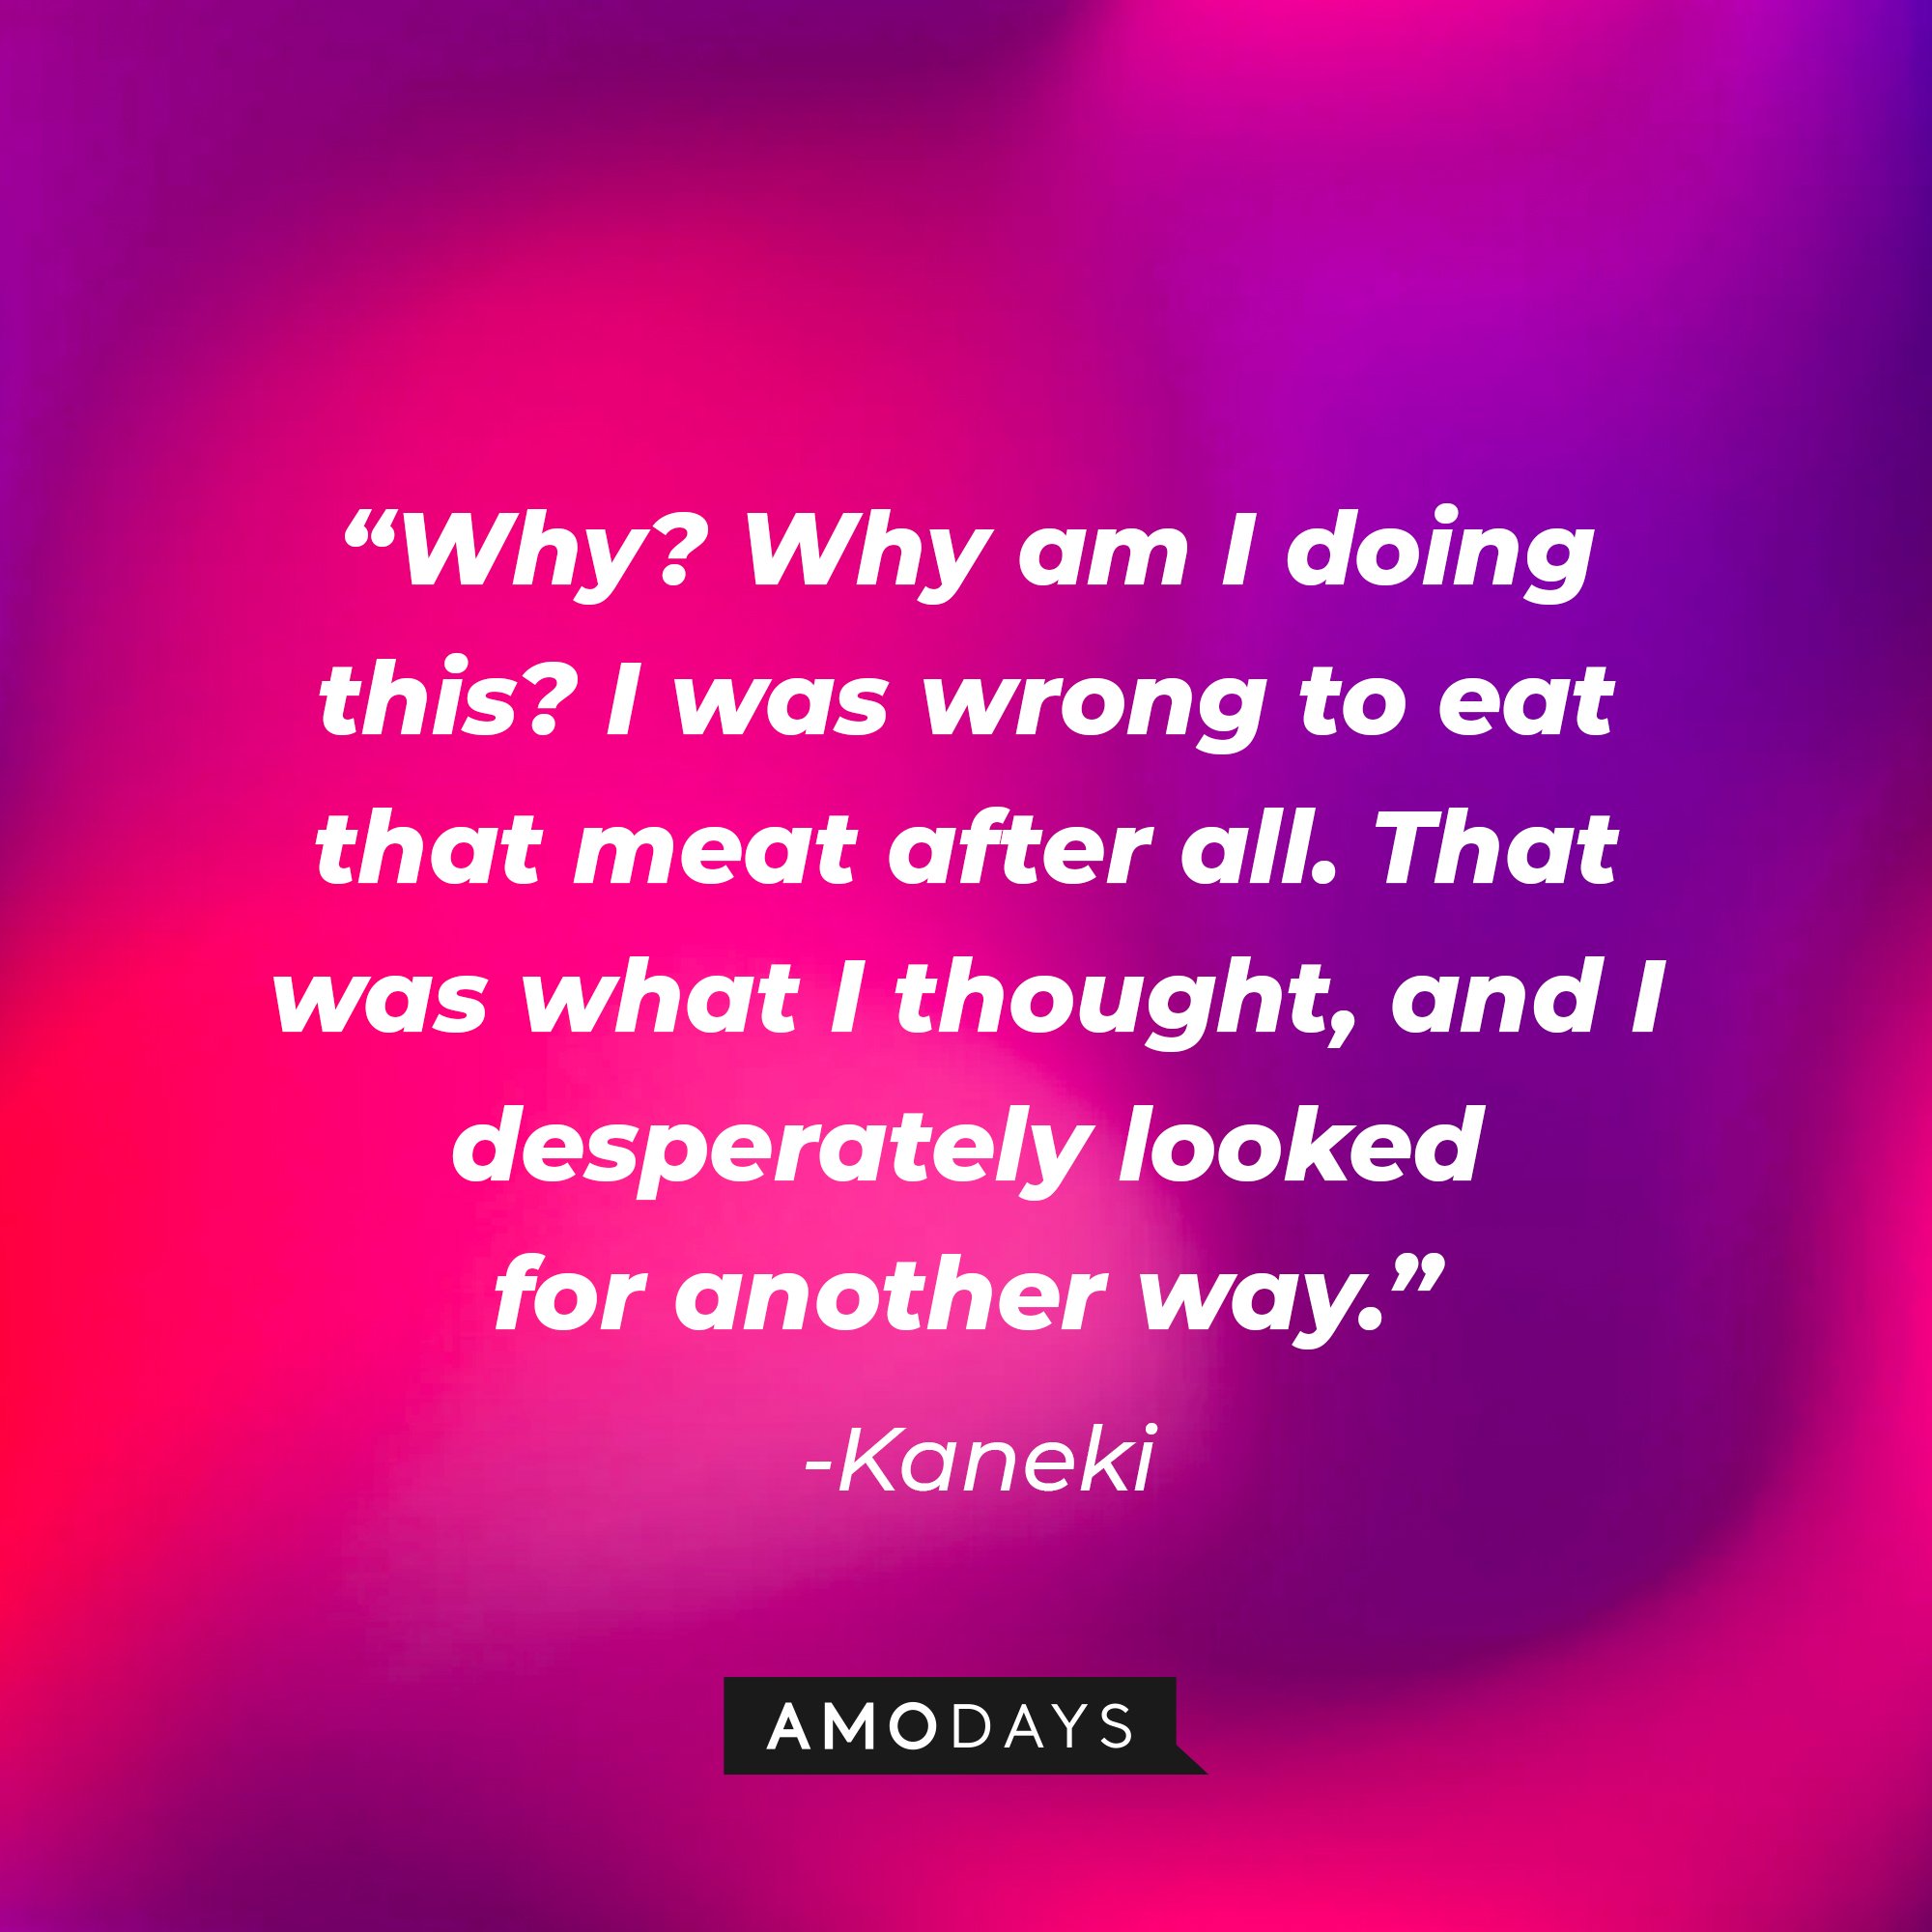 Kaneki's quote: “Why? Why am I doing this? I was wrong to eat that meat after all. That was what I thought, and I desperately looked for another way.” | Image: AmoDays